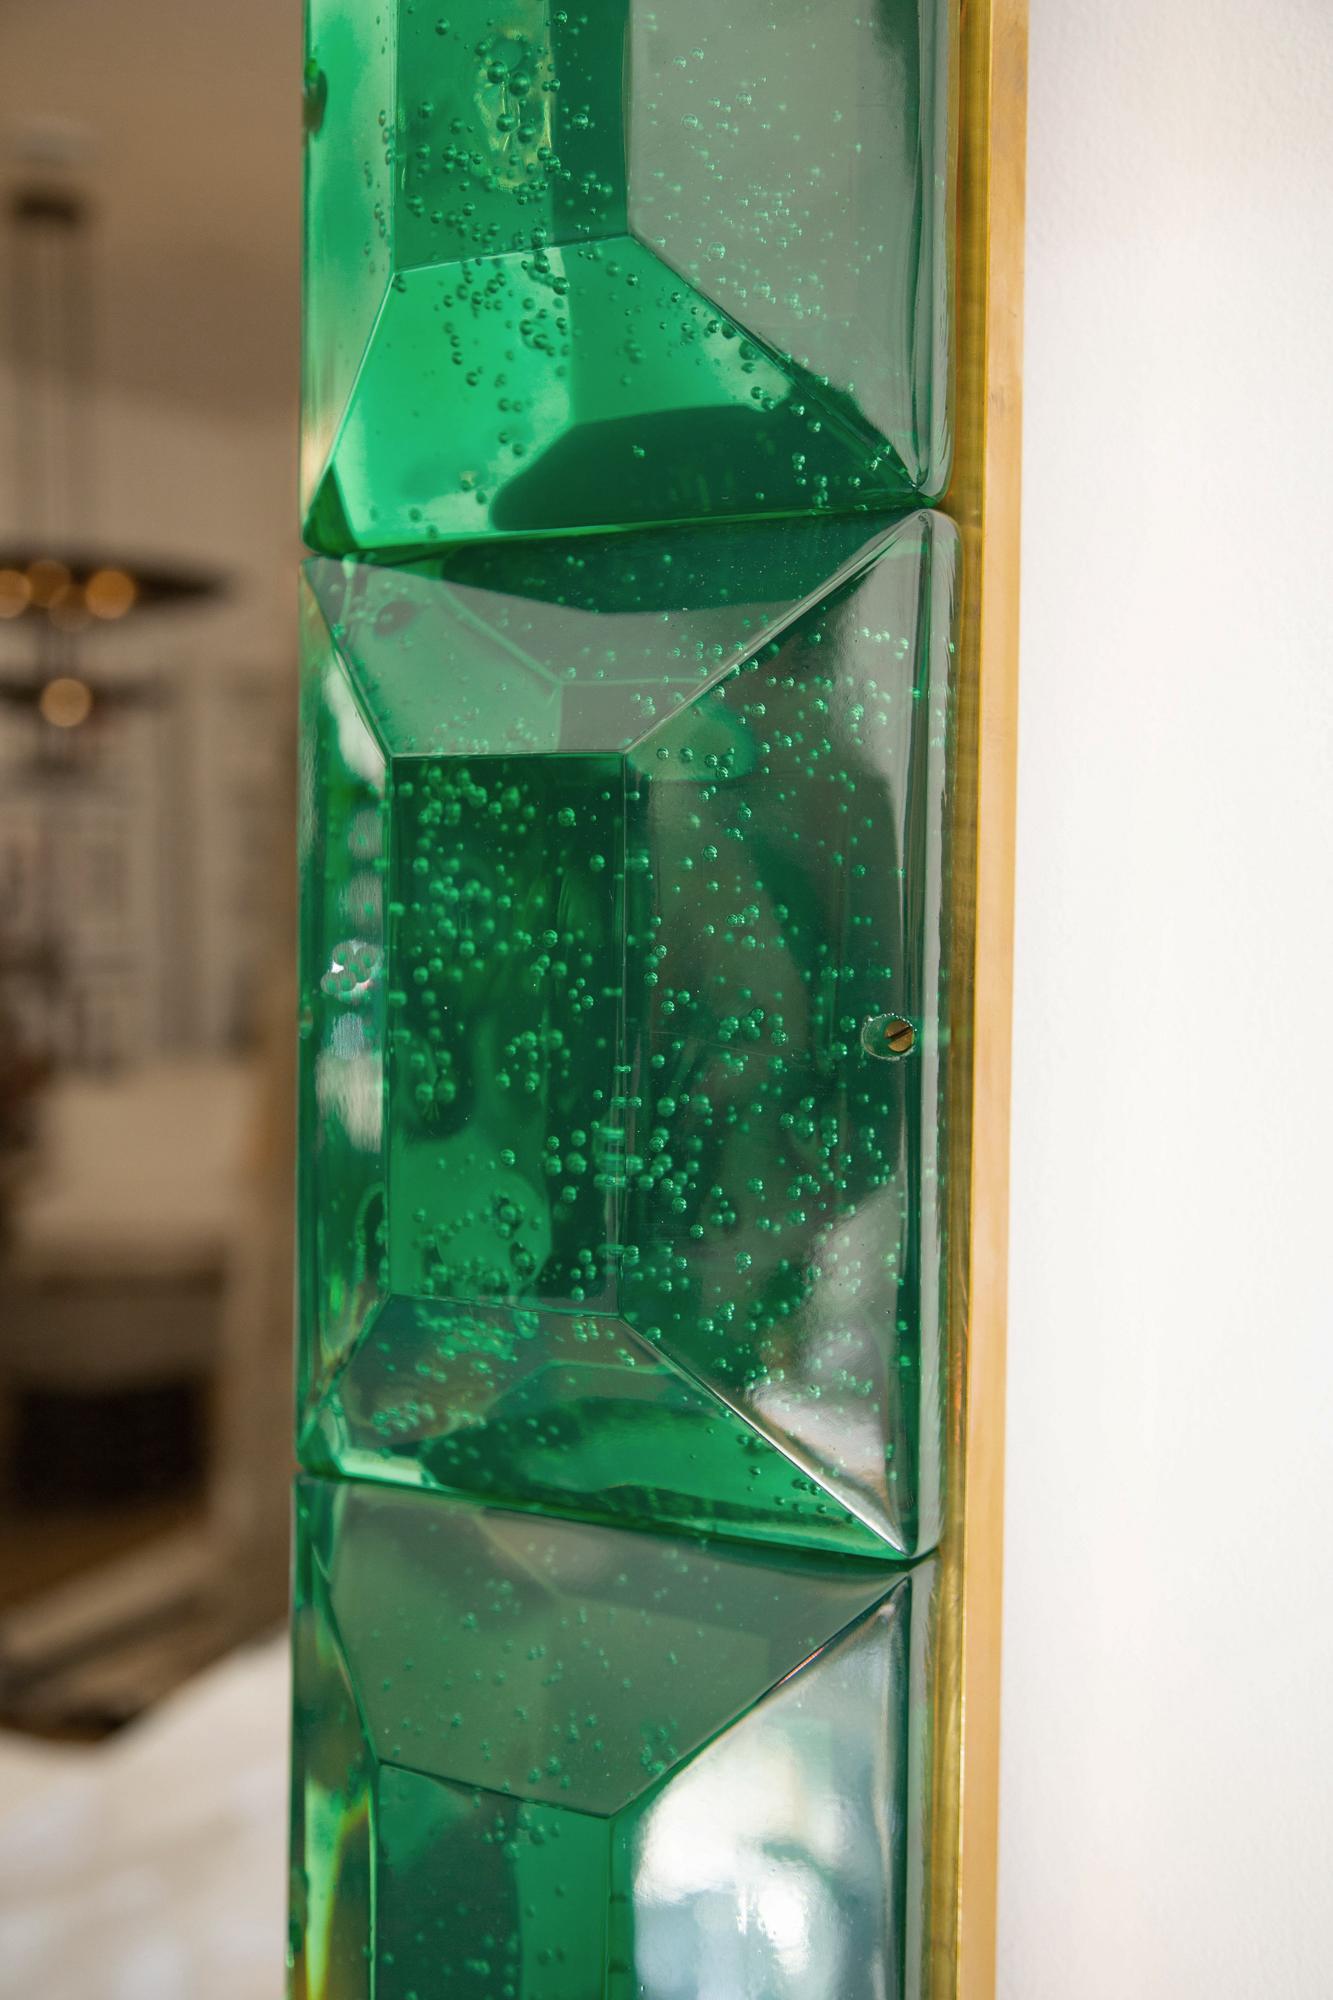 Large emerald green diamond cut Murano glass mirror.
 Vivid and intense emerald green glass block with naturally occurring air inclusions throughout 
 Highly polished faceted pattern
 Brass gallery
 Luxury handcrafted by a team of artisans in